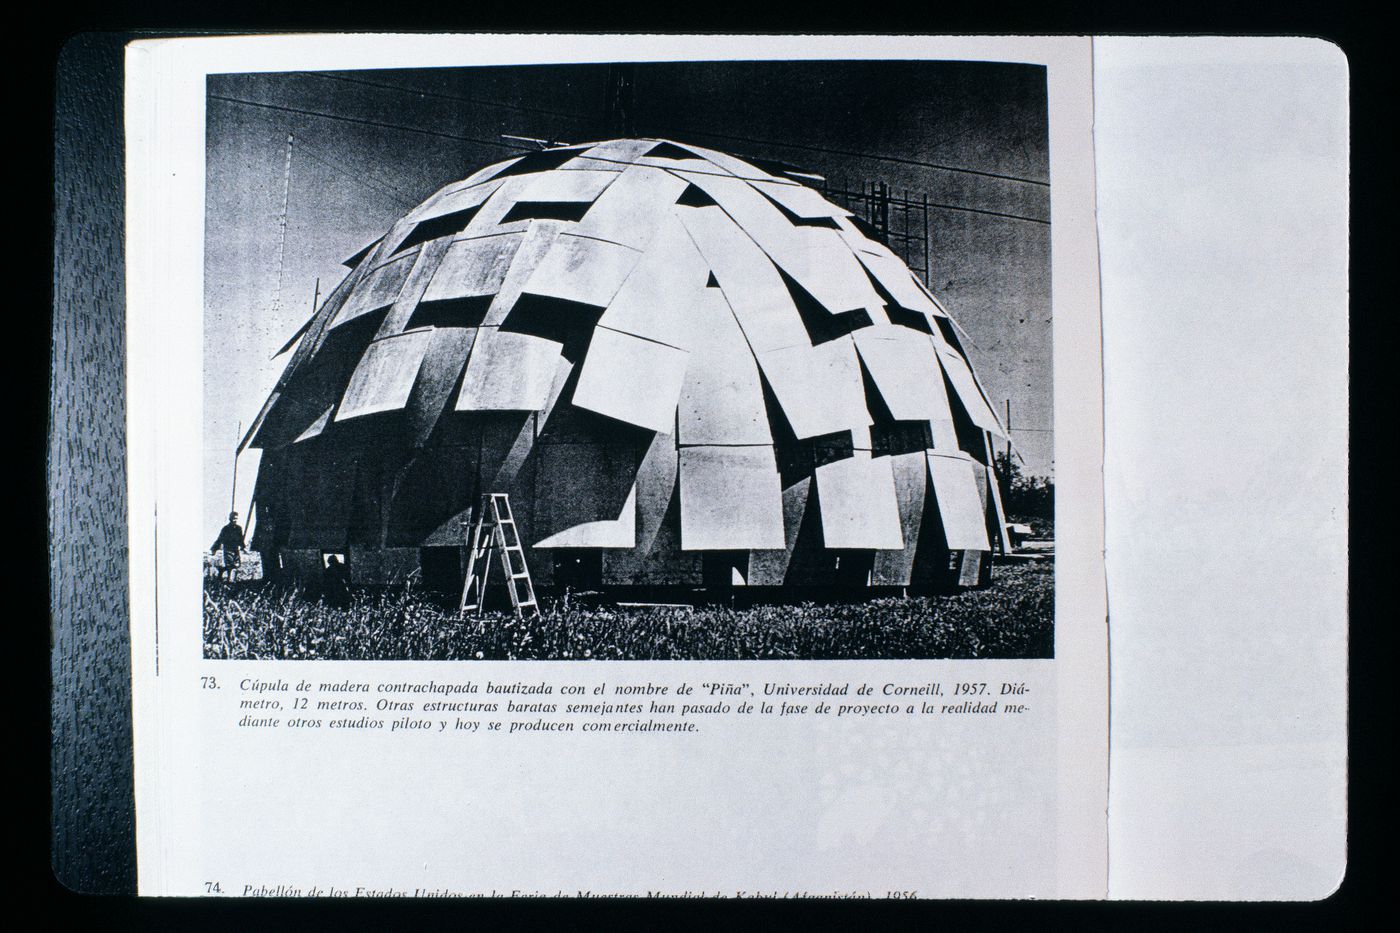 Slide of a photograph of Cornell Pinecone Plydome, Ithaca, by R. Buckminster Fuller